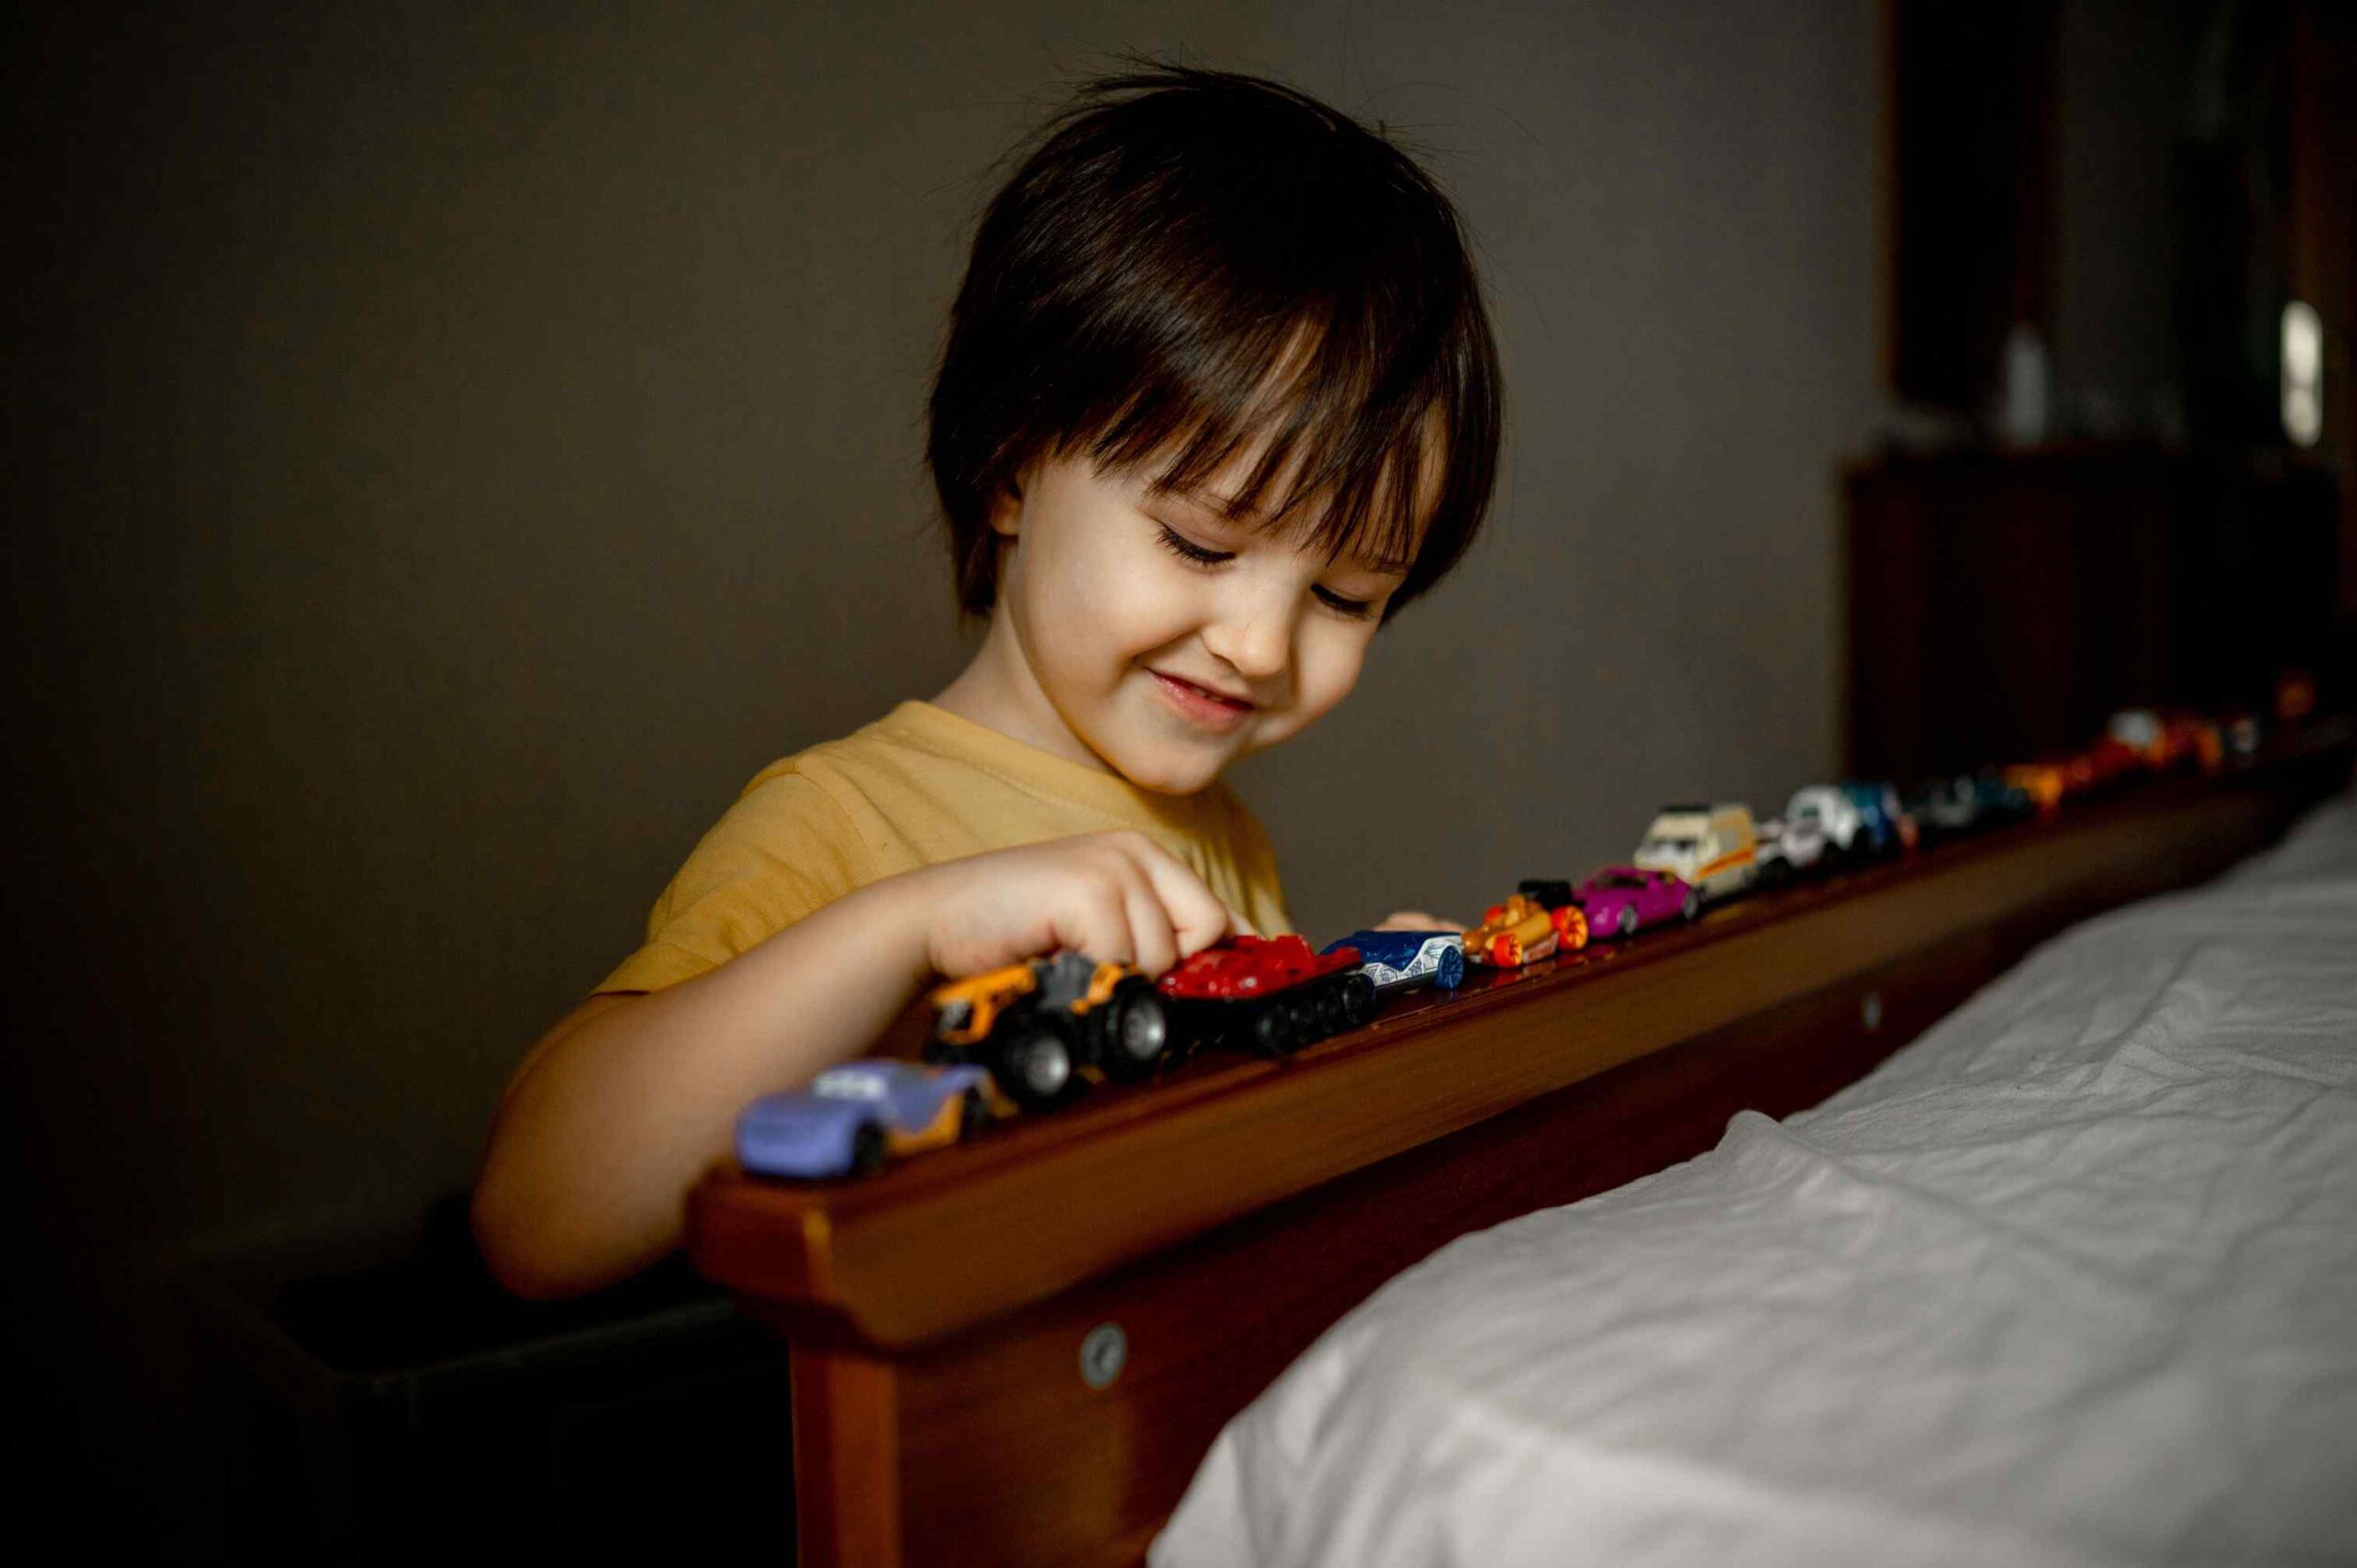 a-boy-at-home-is-playing-with-toy-cars-traffic-ja-2022-11-15-08-05-33-utc